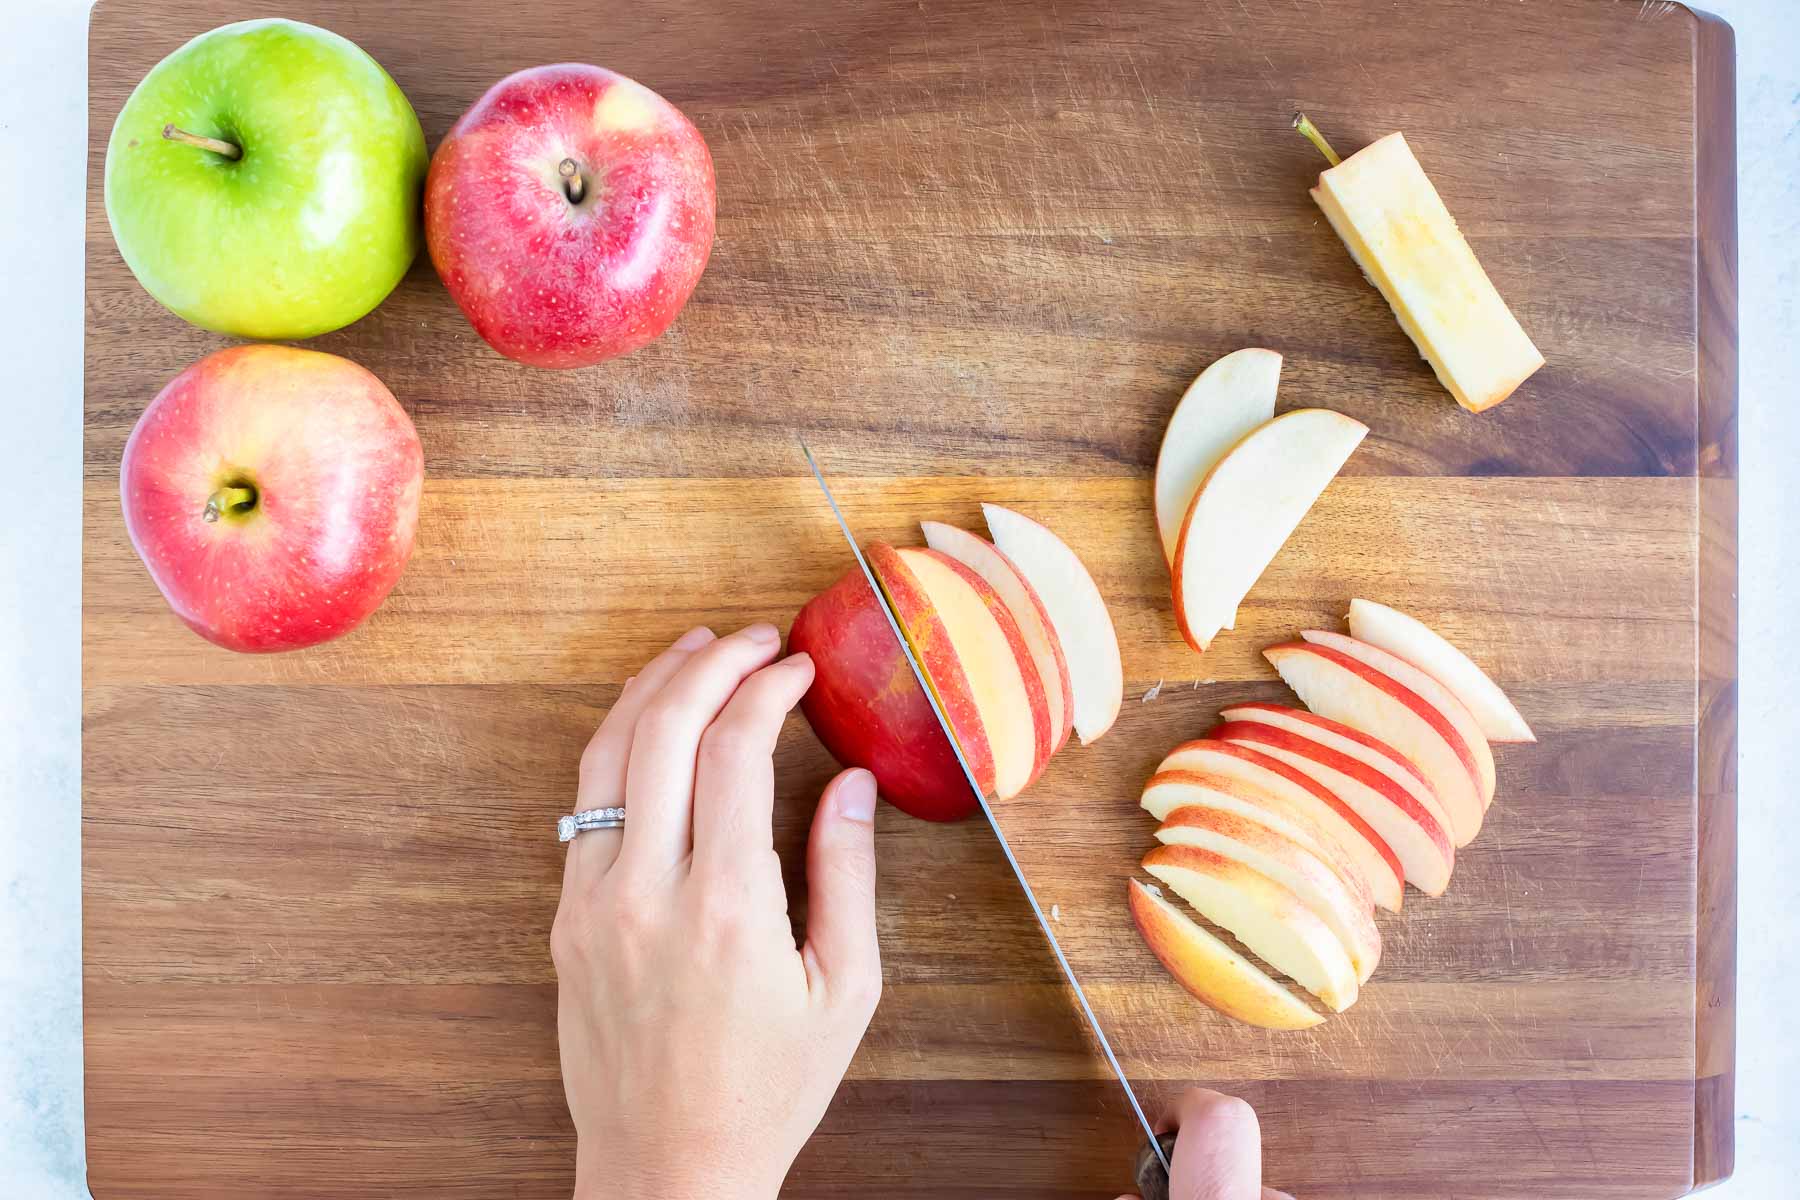 Cutting apple slices with a knife on a cutting board with other apples waiting to be cut and the core to the side.